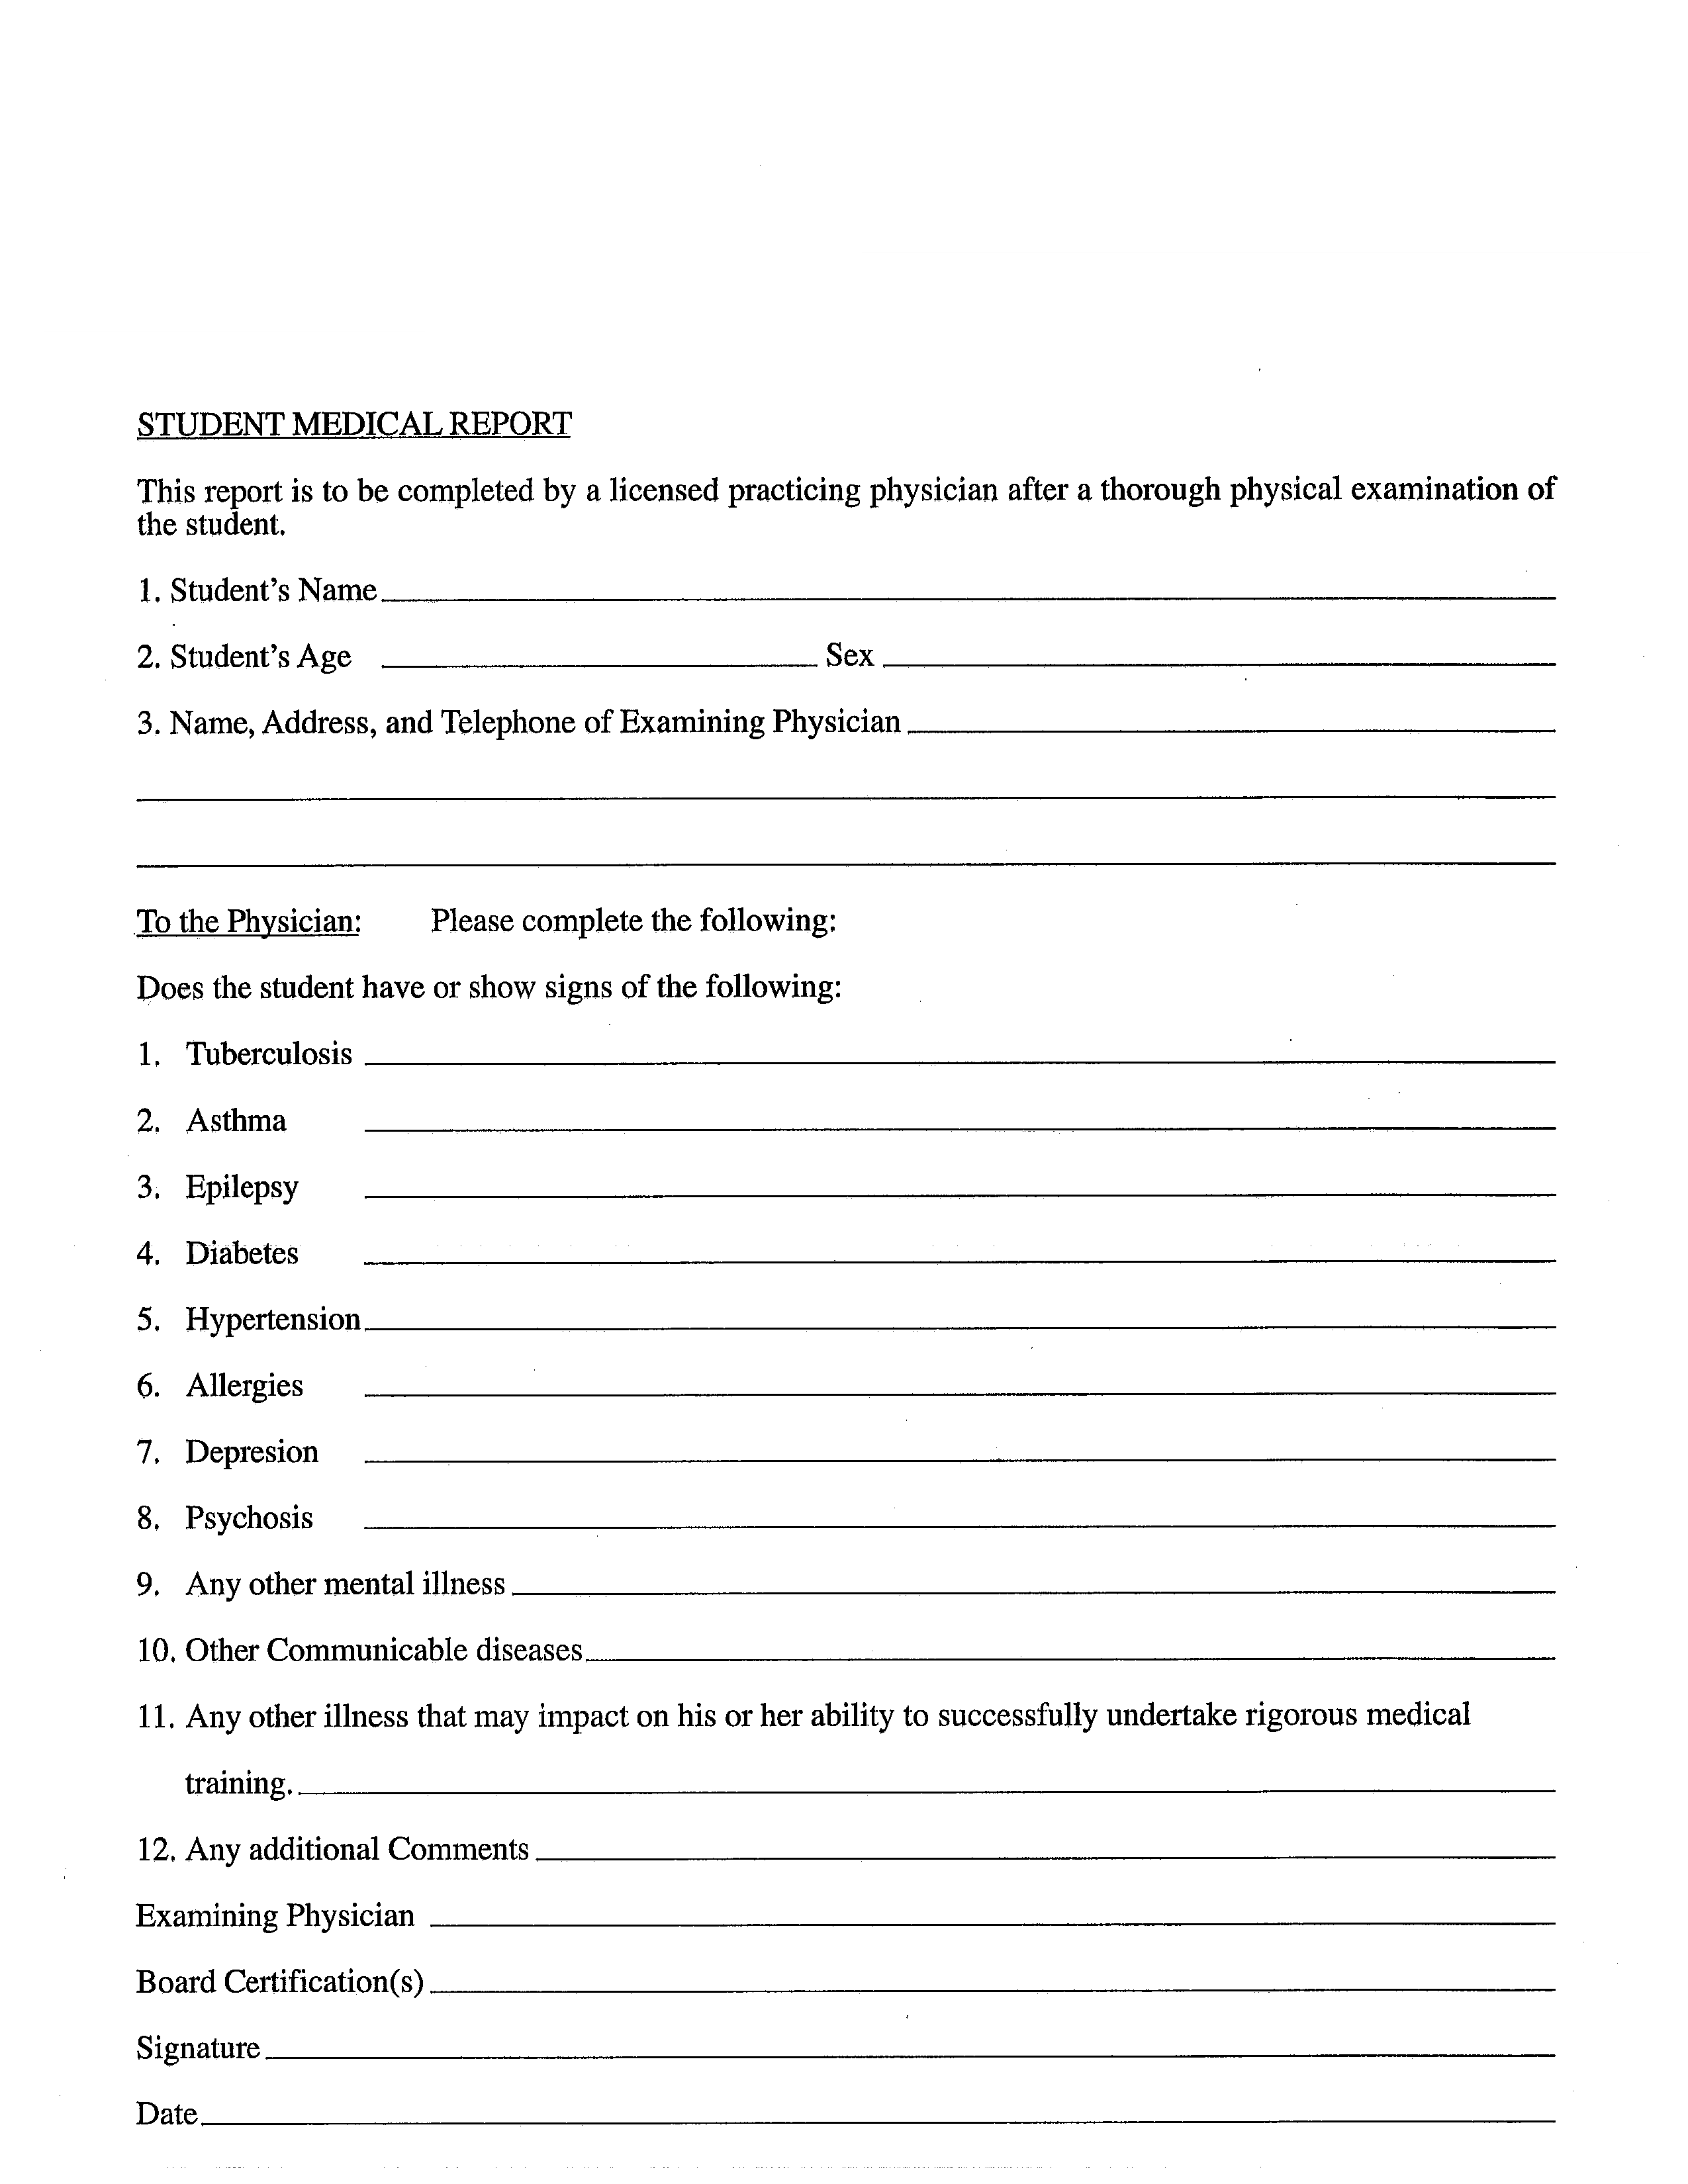 Student Medical Report Form  Templates at allbusinesstemplates.com Pertaining To Patient Report Form Template Download